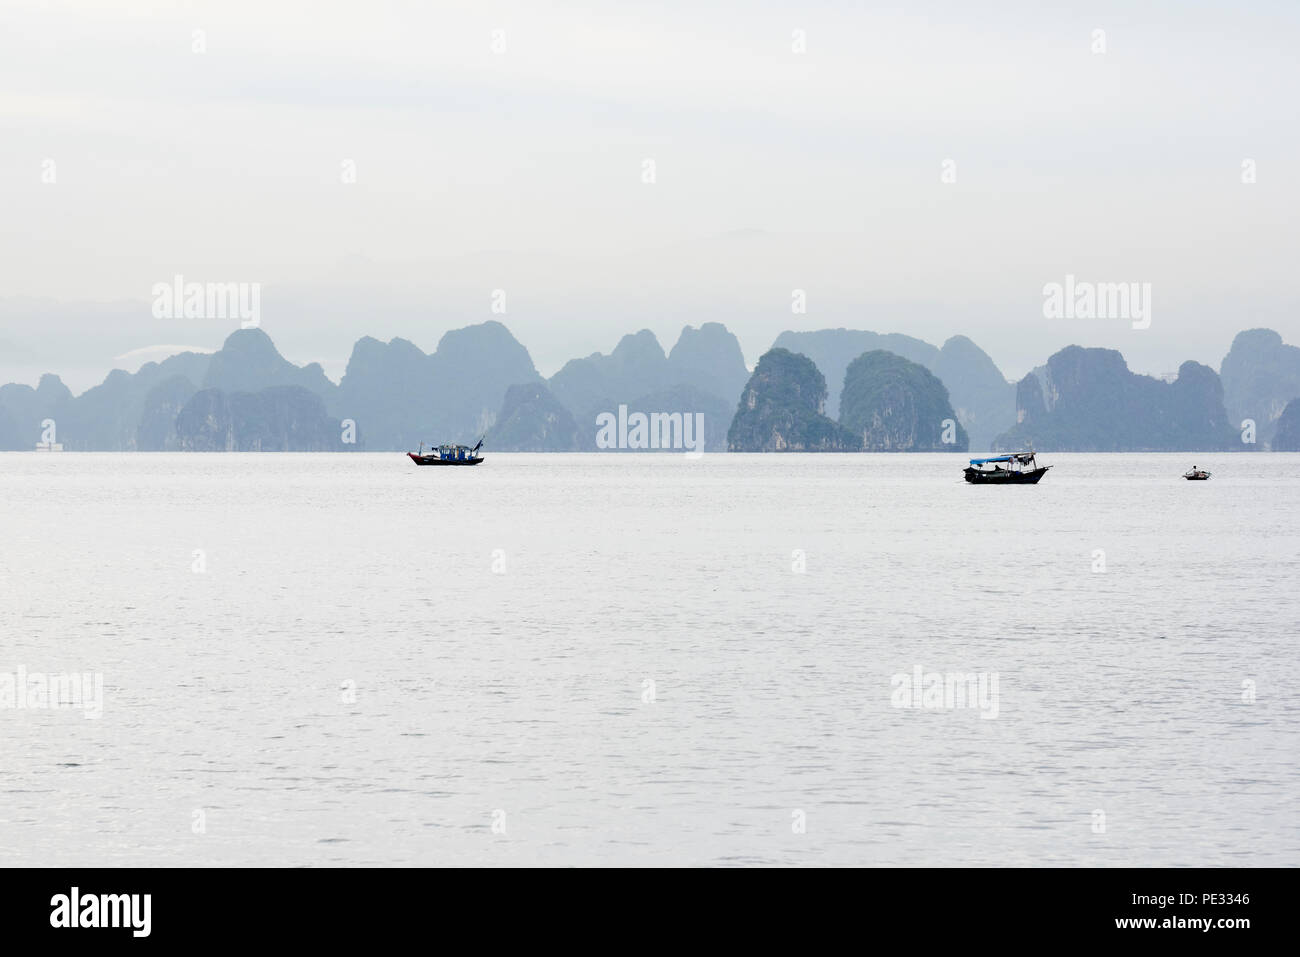 Quiet scenic seascape of Halong Bay, North Vietnam, with small fishing boats silhouetted against misty blue mountains in the background. Muted colours Stock Photo